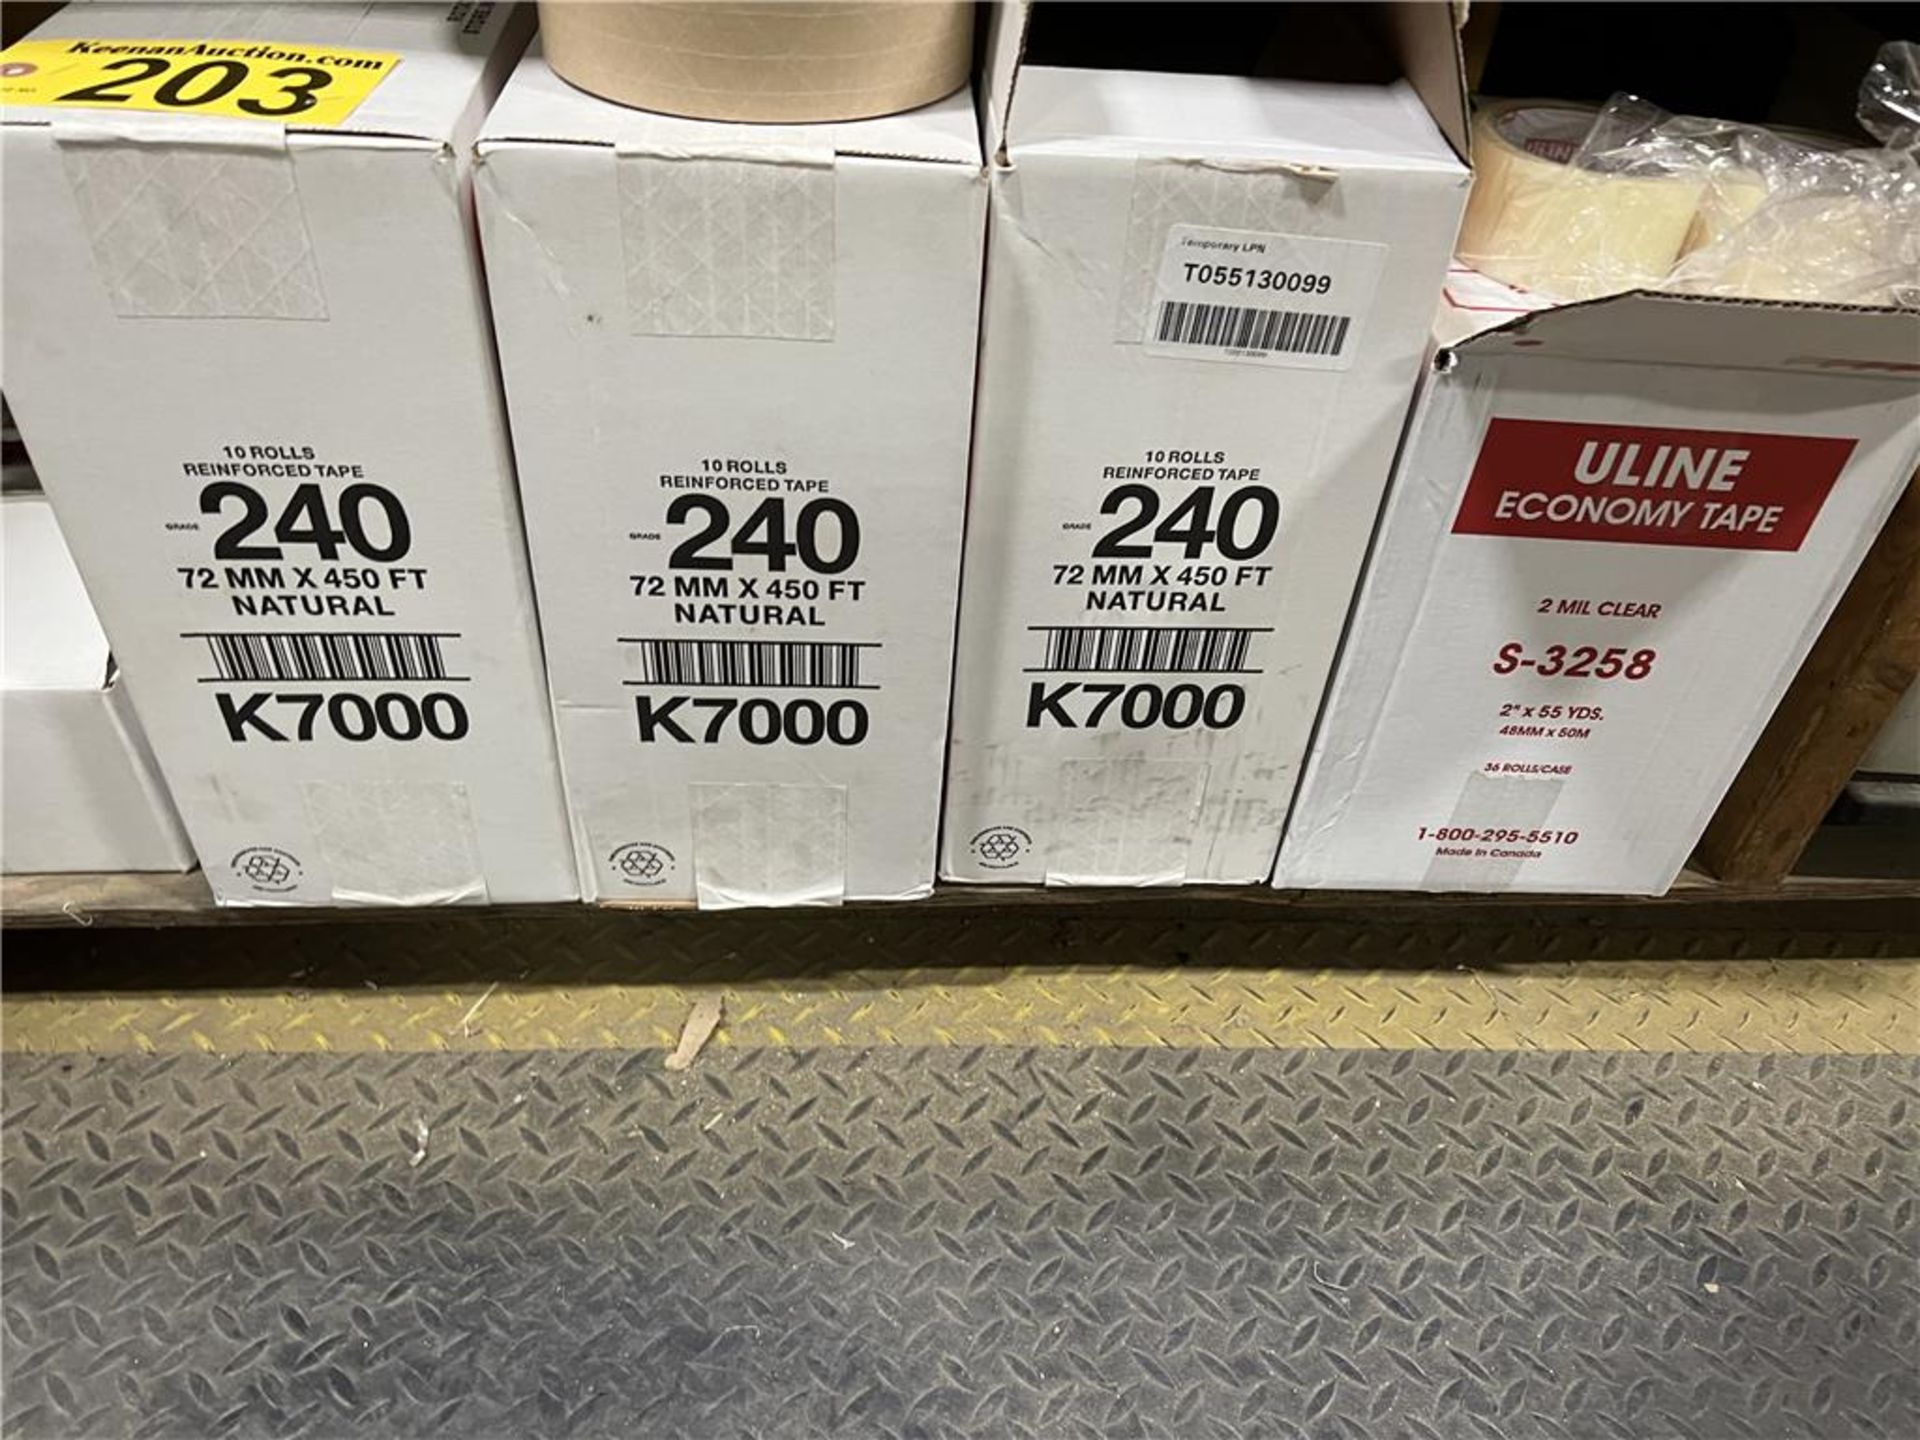 LOT: SHIPPING LABELS, BOX TAPE, 2.5-CASES OF CAN LINERS, 3-DRAWER PLASTIC STORAGE CABINET - Image 5 of 6